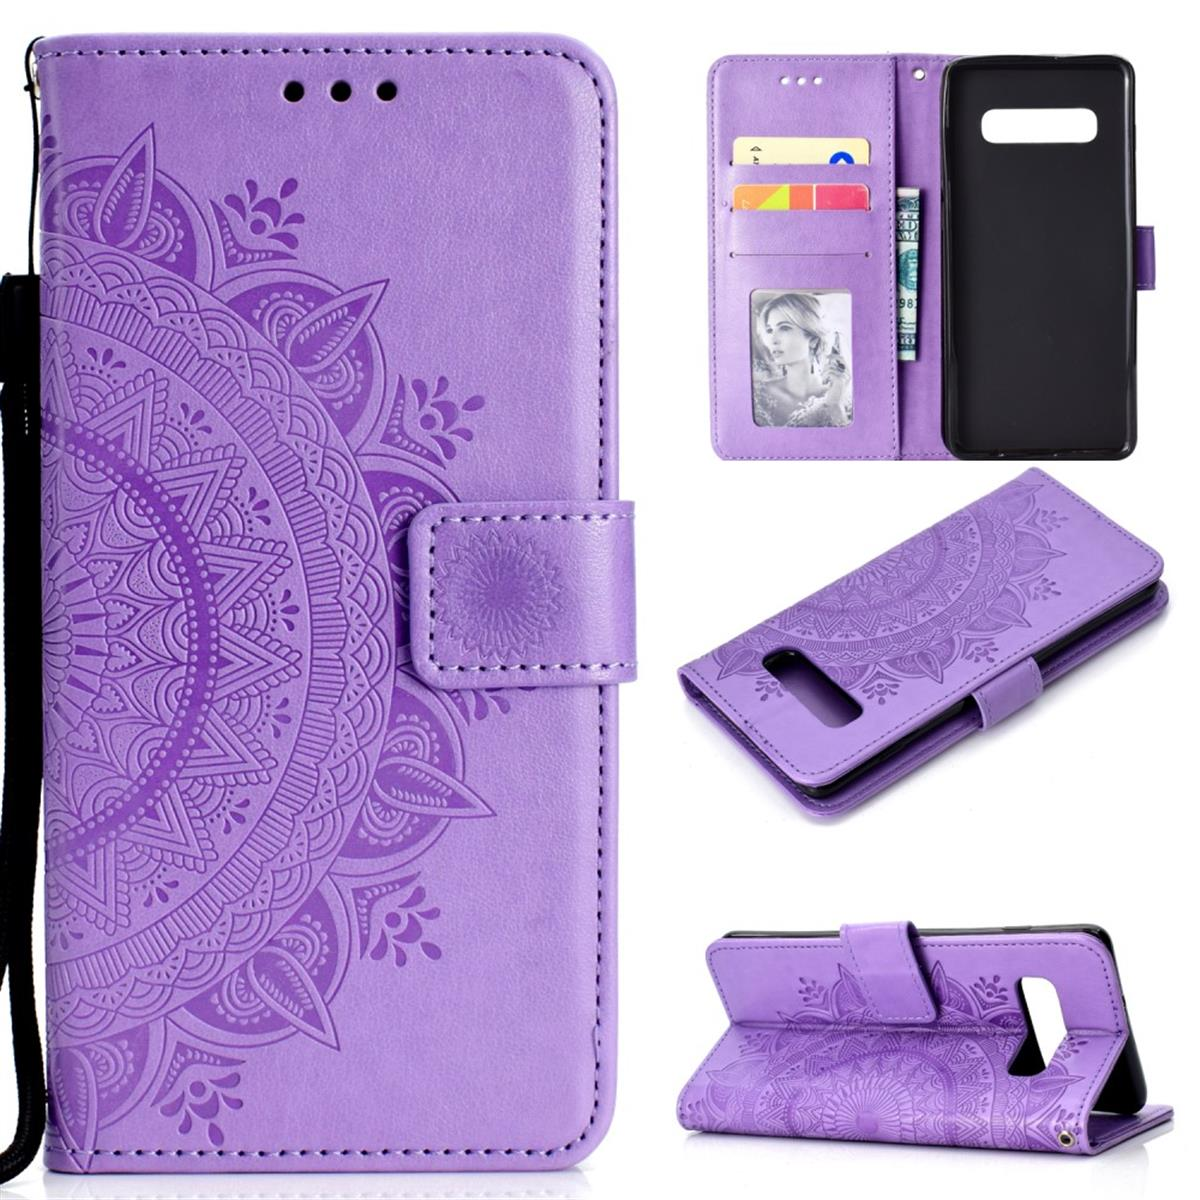 COVERKINGZ Klapphülle mit Mandala Muster, Samsung, Lila S10, Bookcover, Galaxy